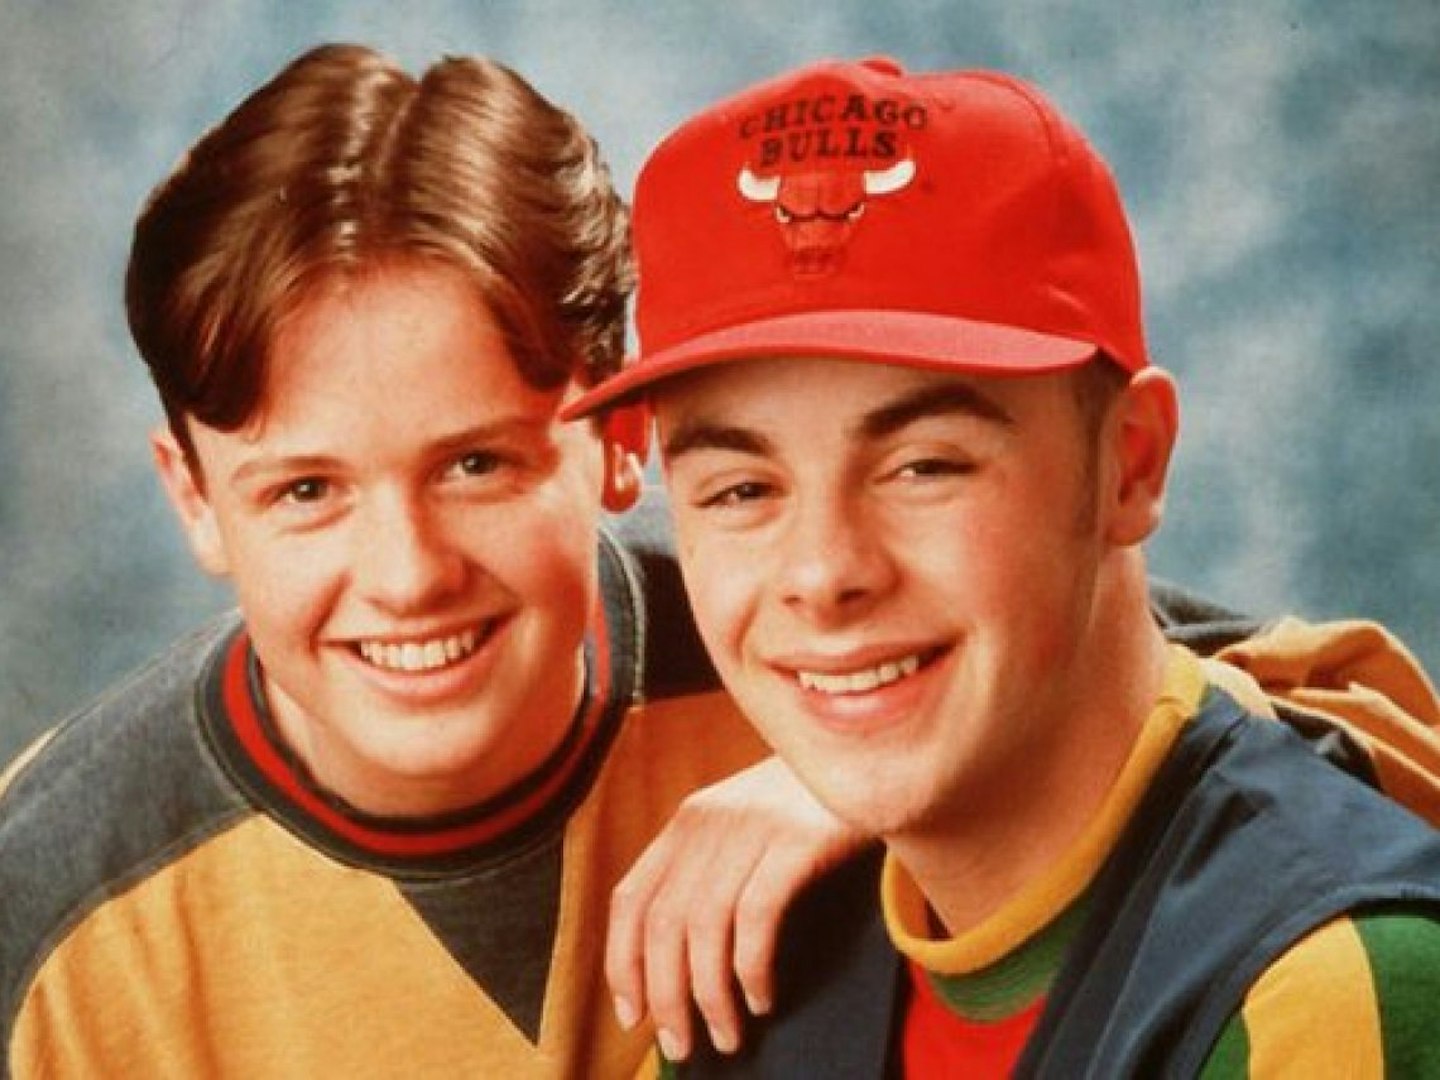 Byker Grove cast: Where are they now?